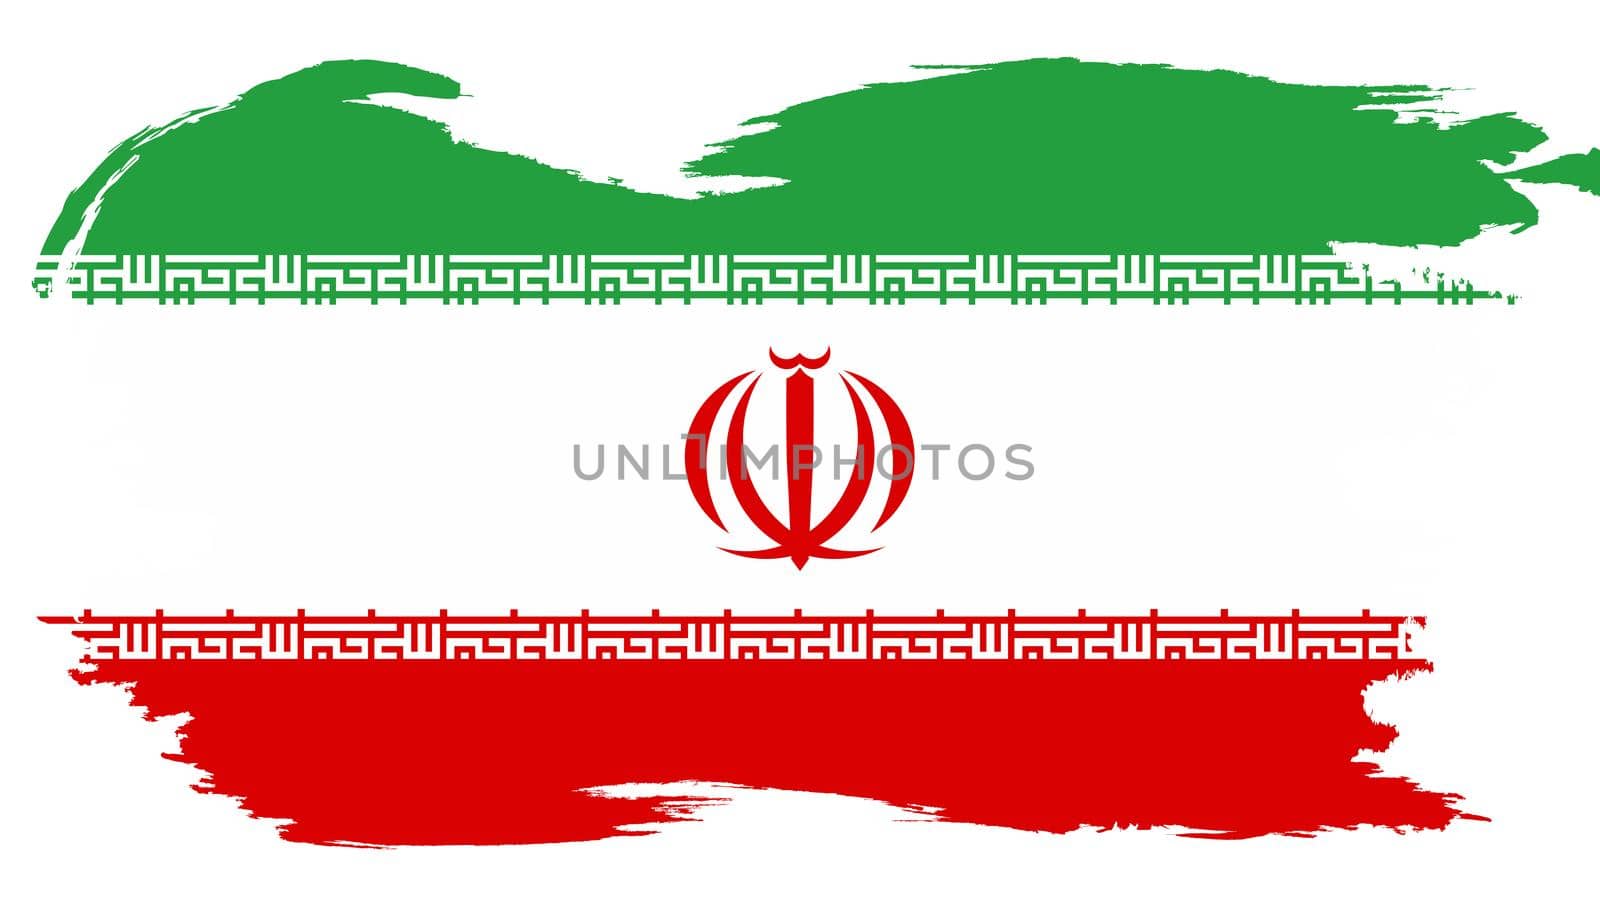 The national flag of Iran in red, white and green with a white grunge border